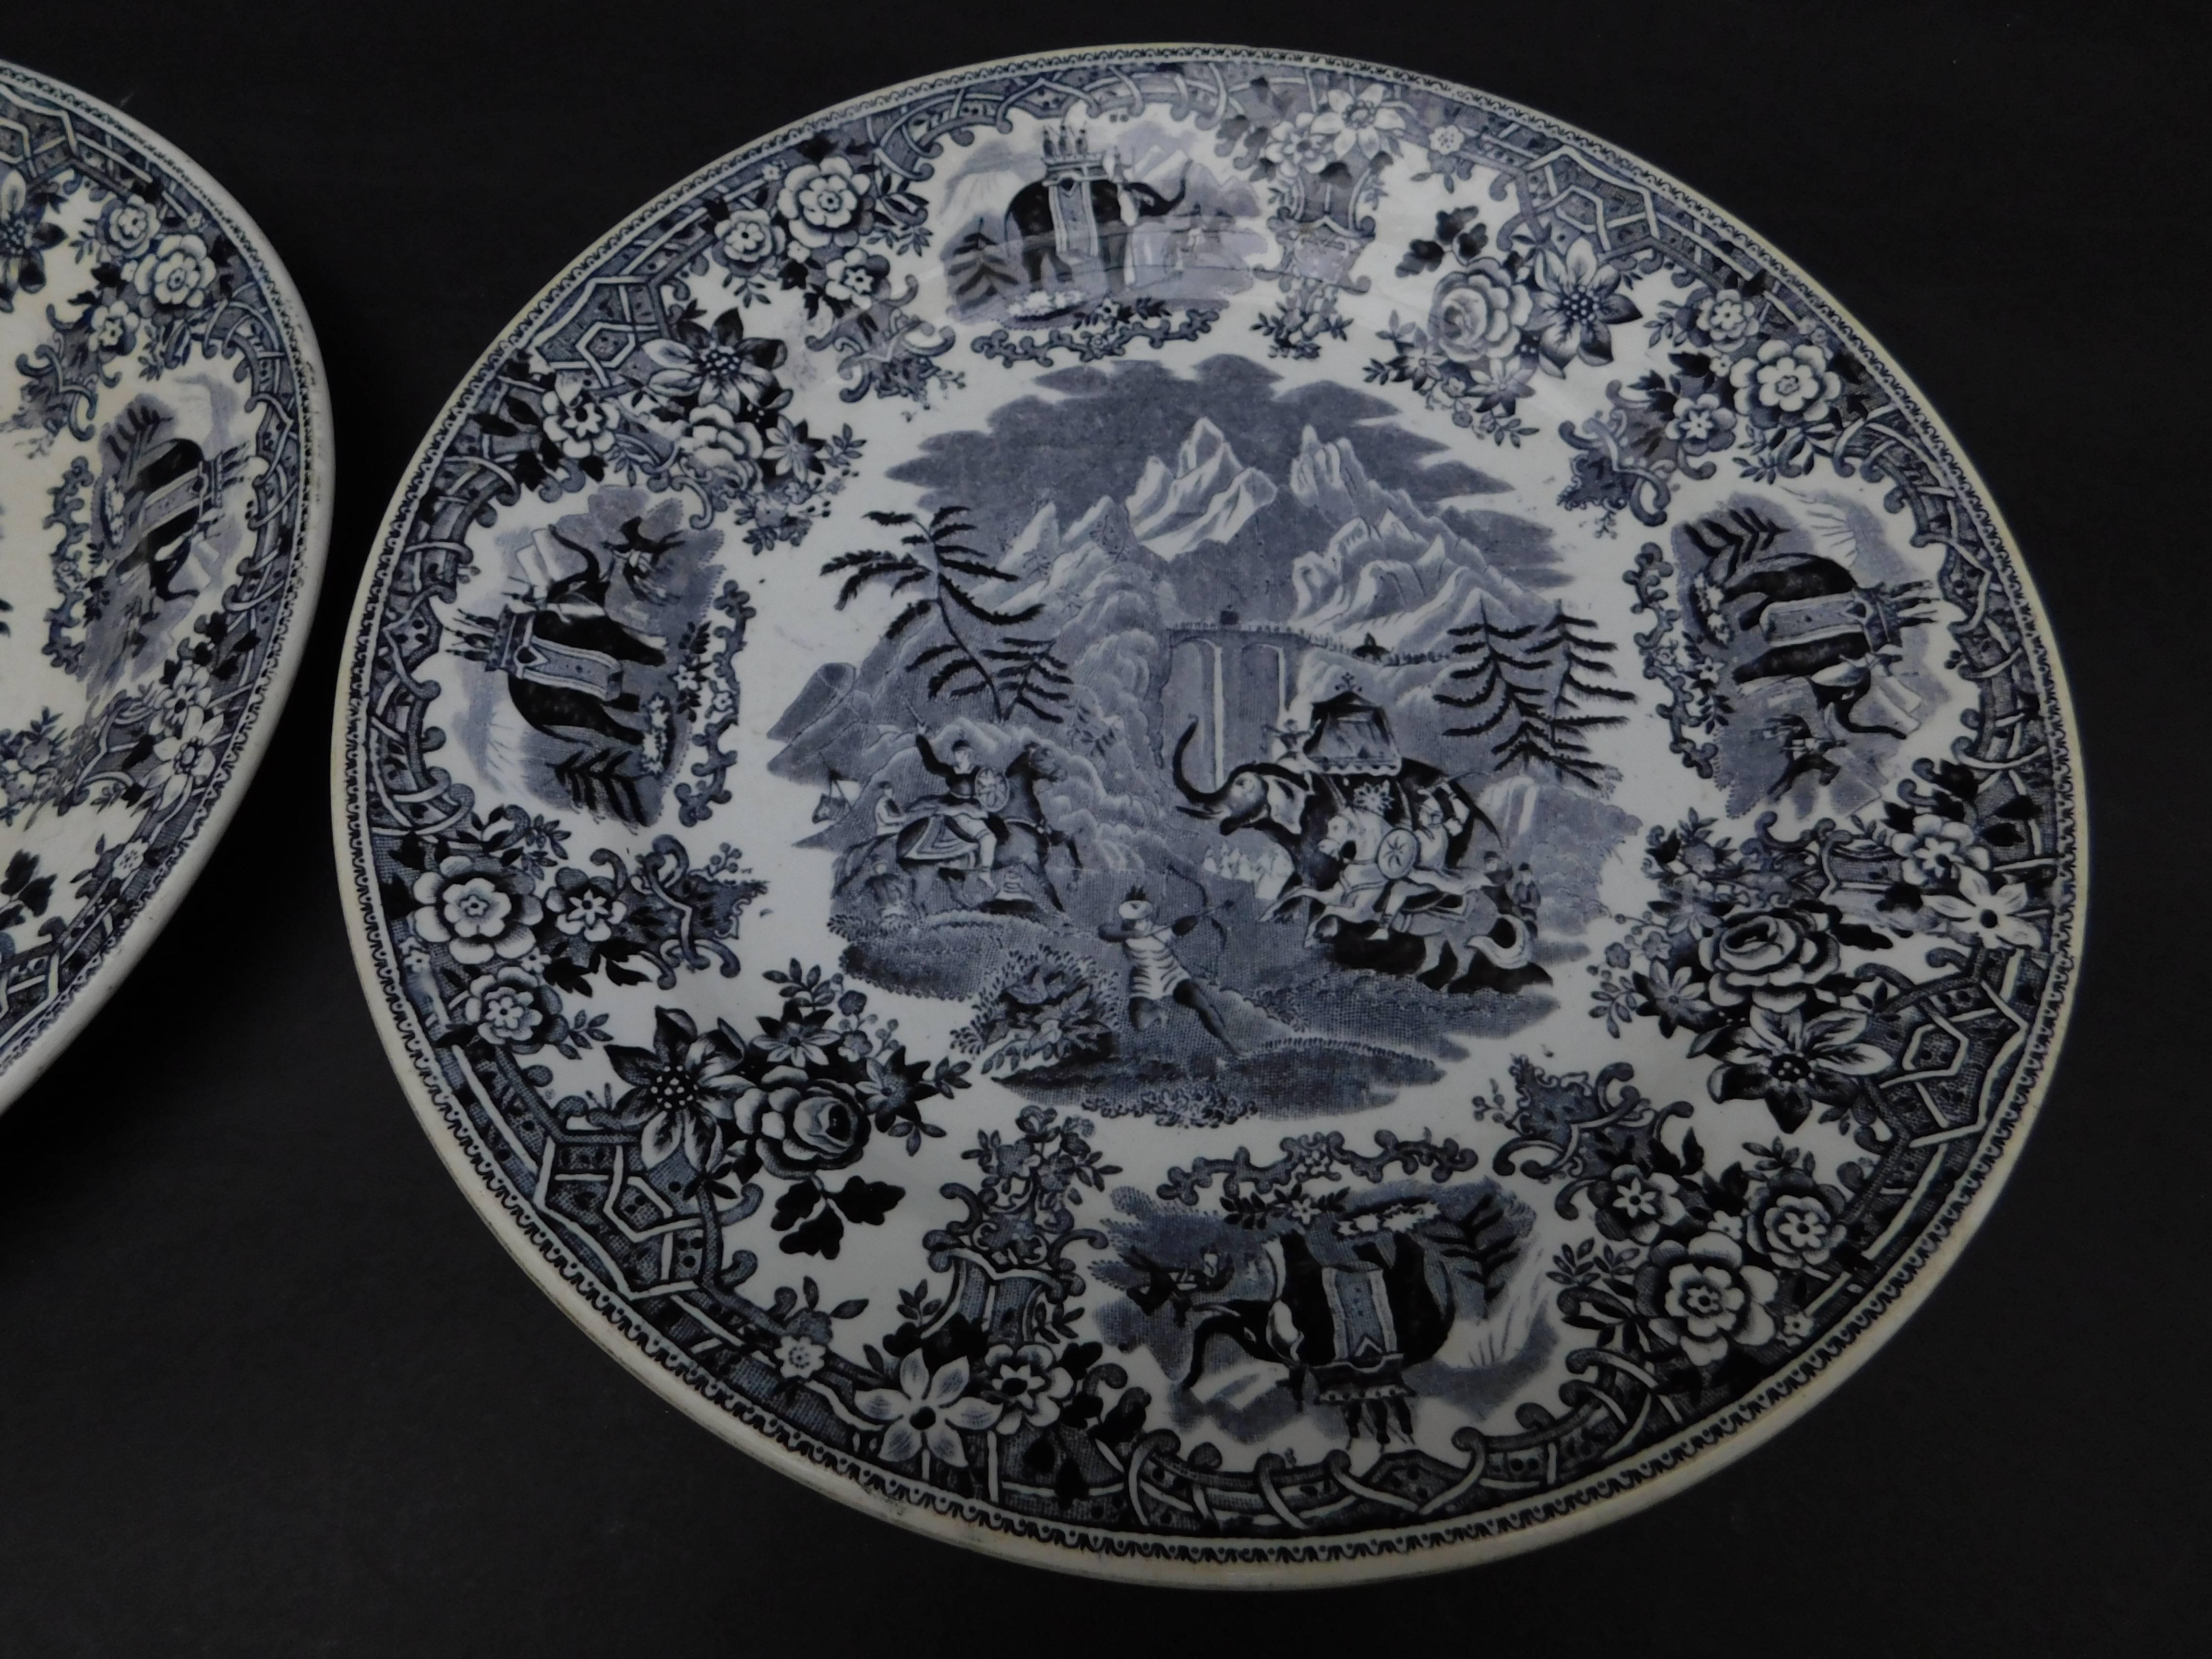 Dutch 19th Century Black & White Transfer Ware Plates Showing Hanibal's Elephant Army For Sale